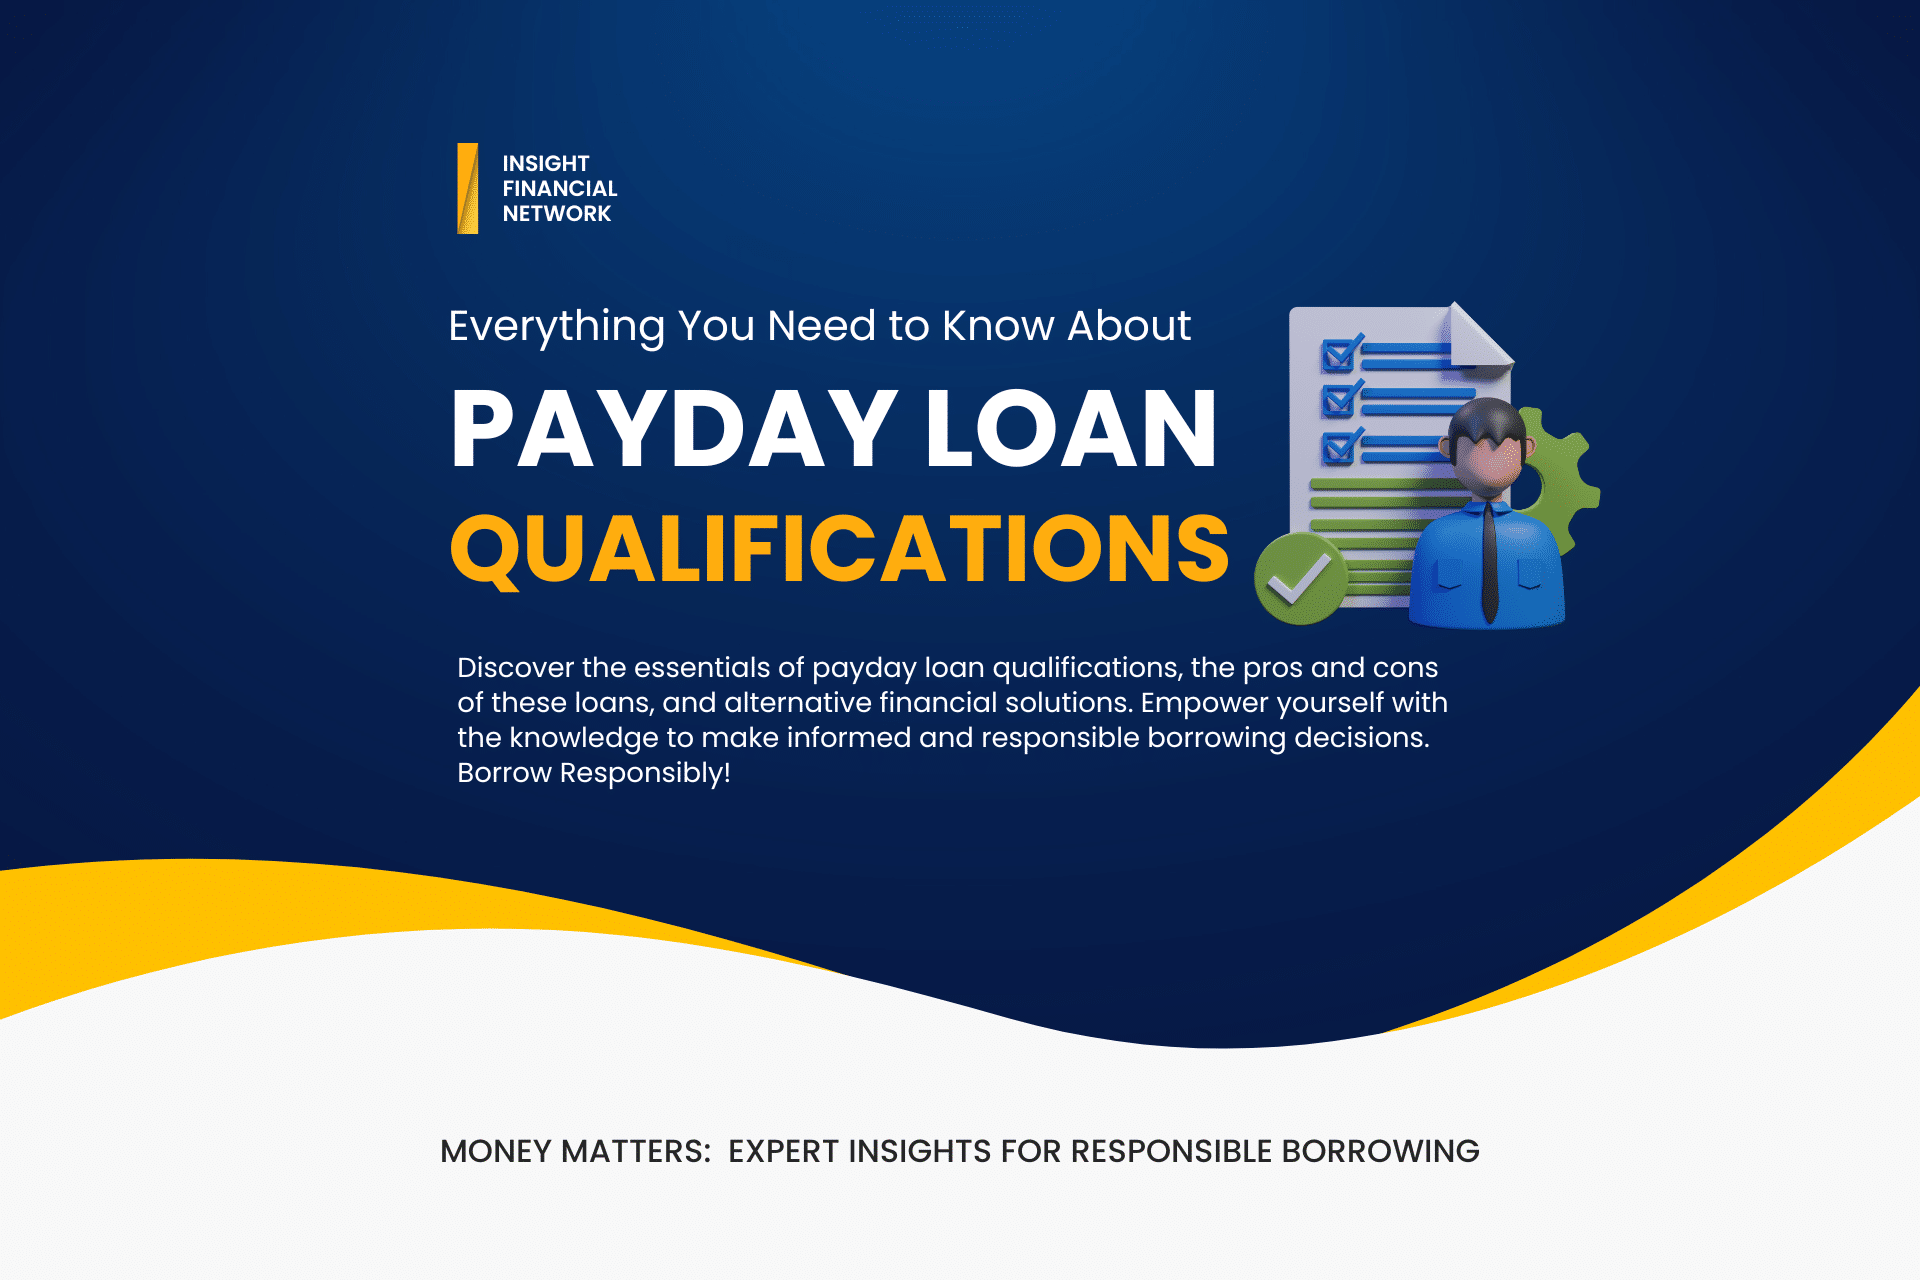 payday loan qualifications